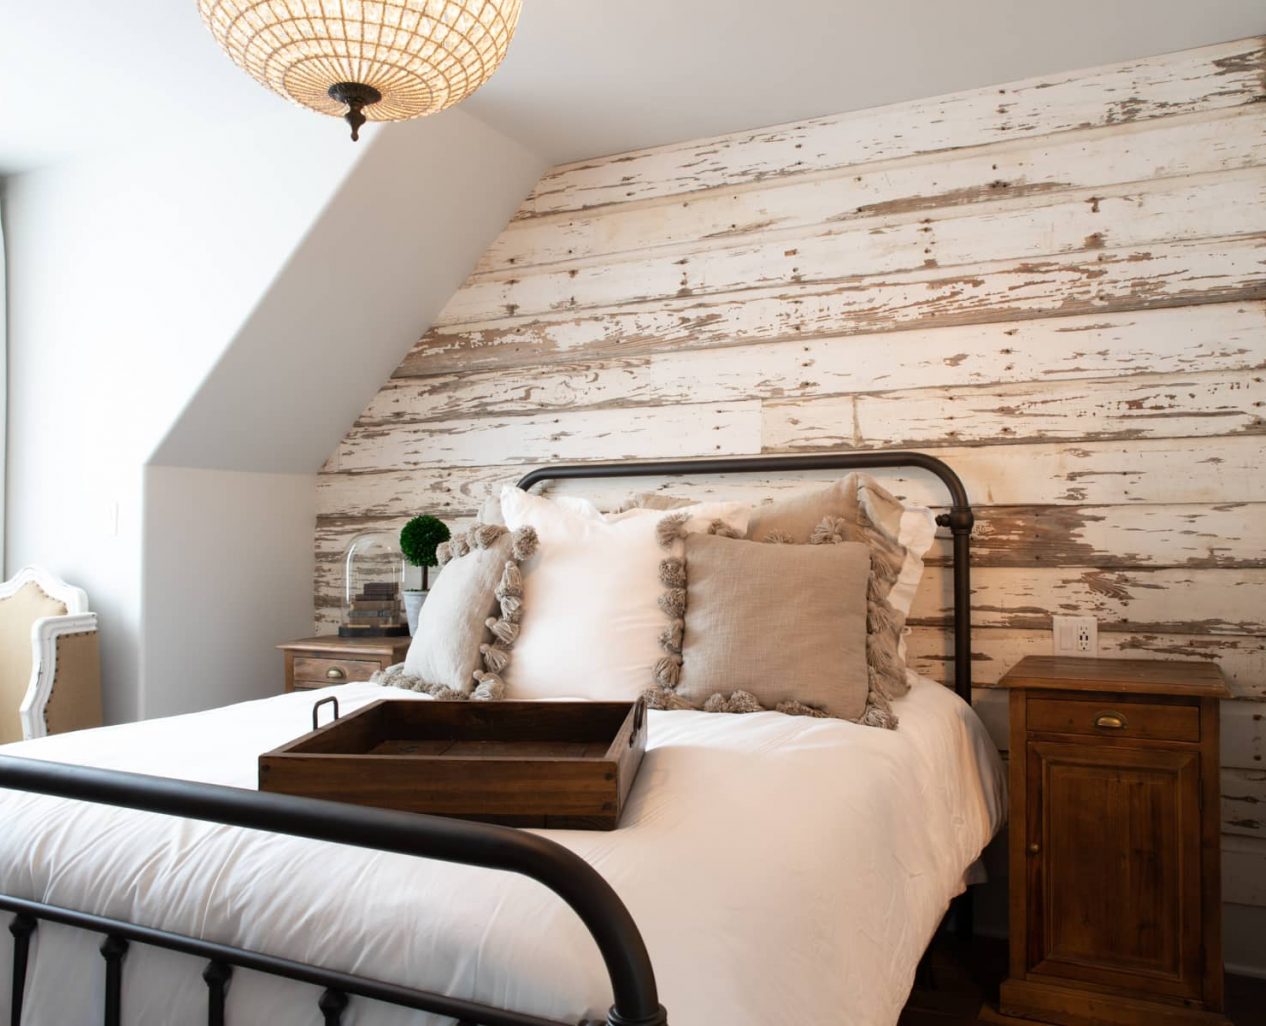 Queen bed in a room with a rustic wood plank wall and seating area near a window